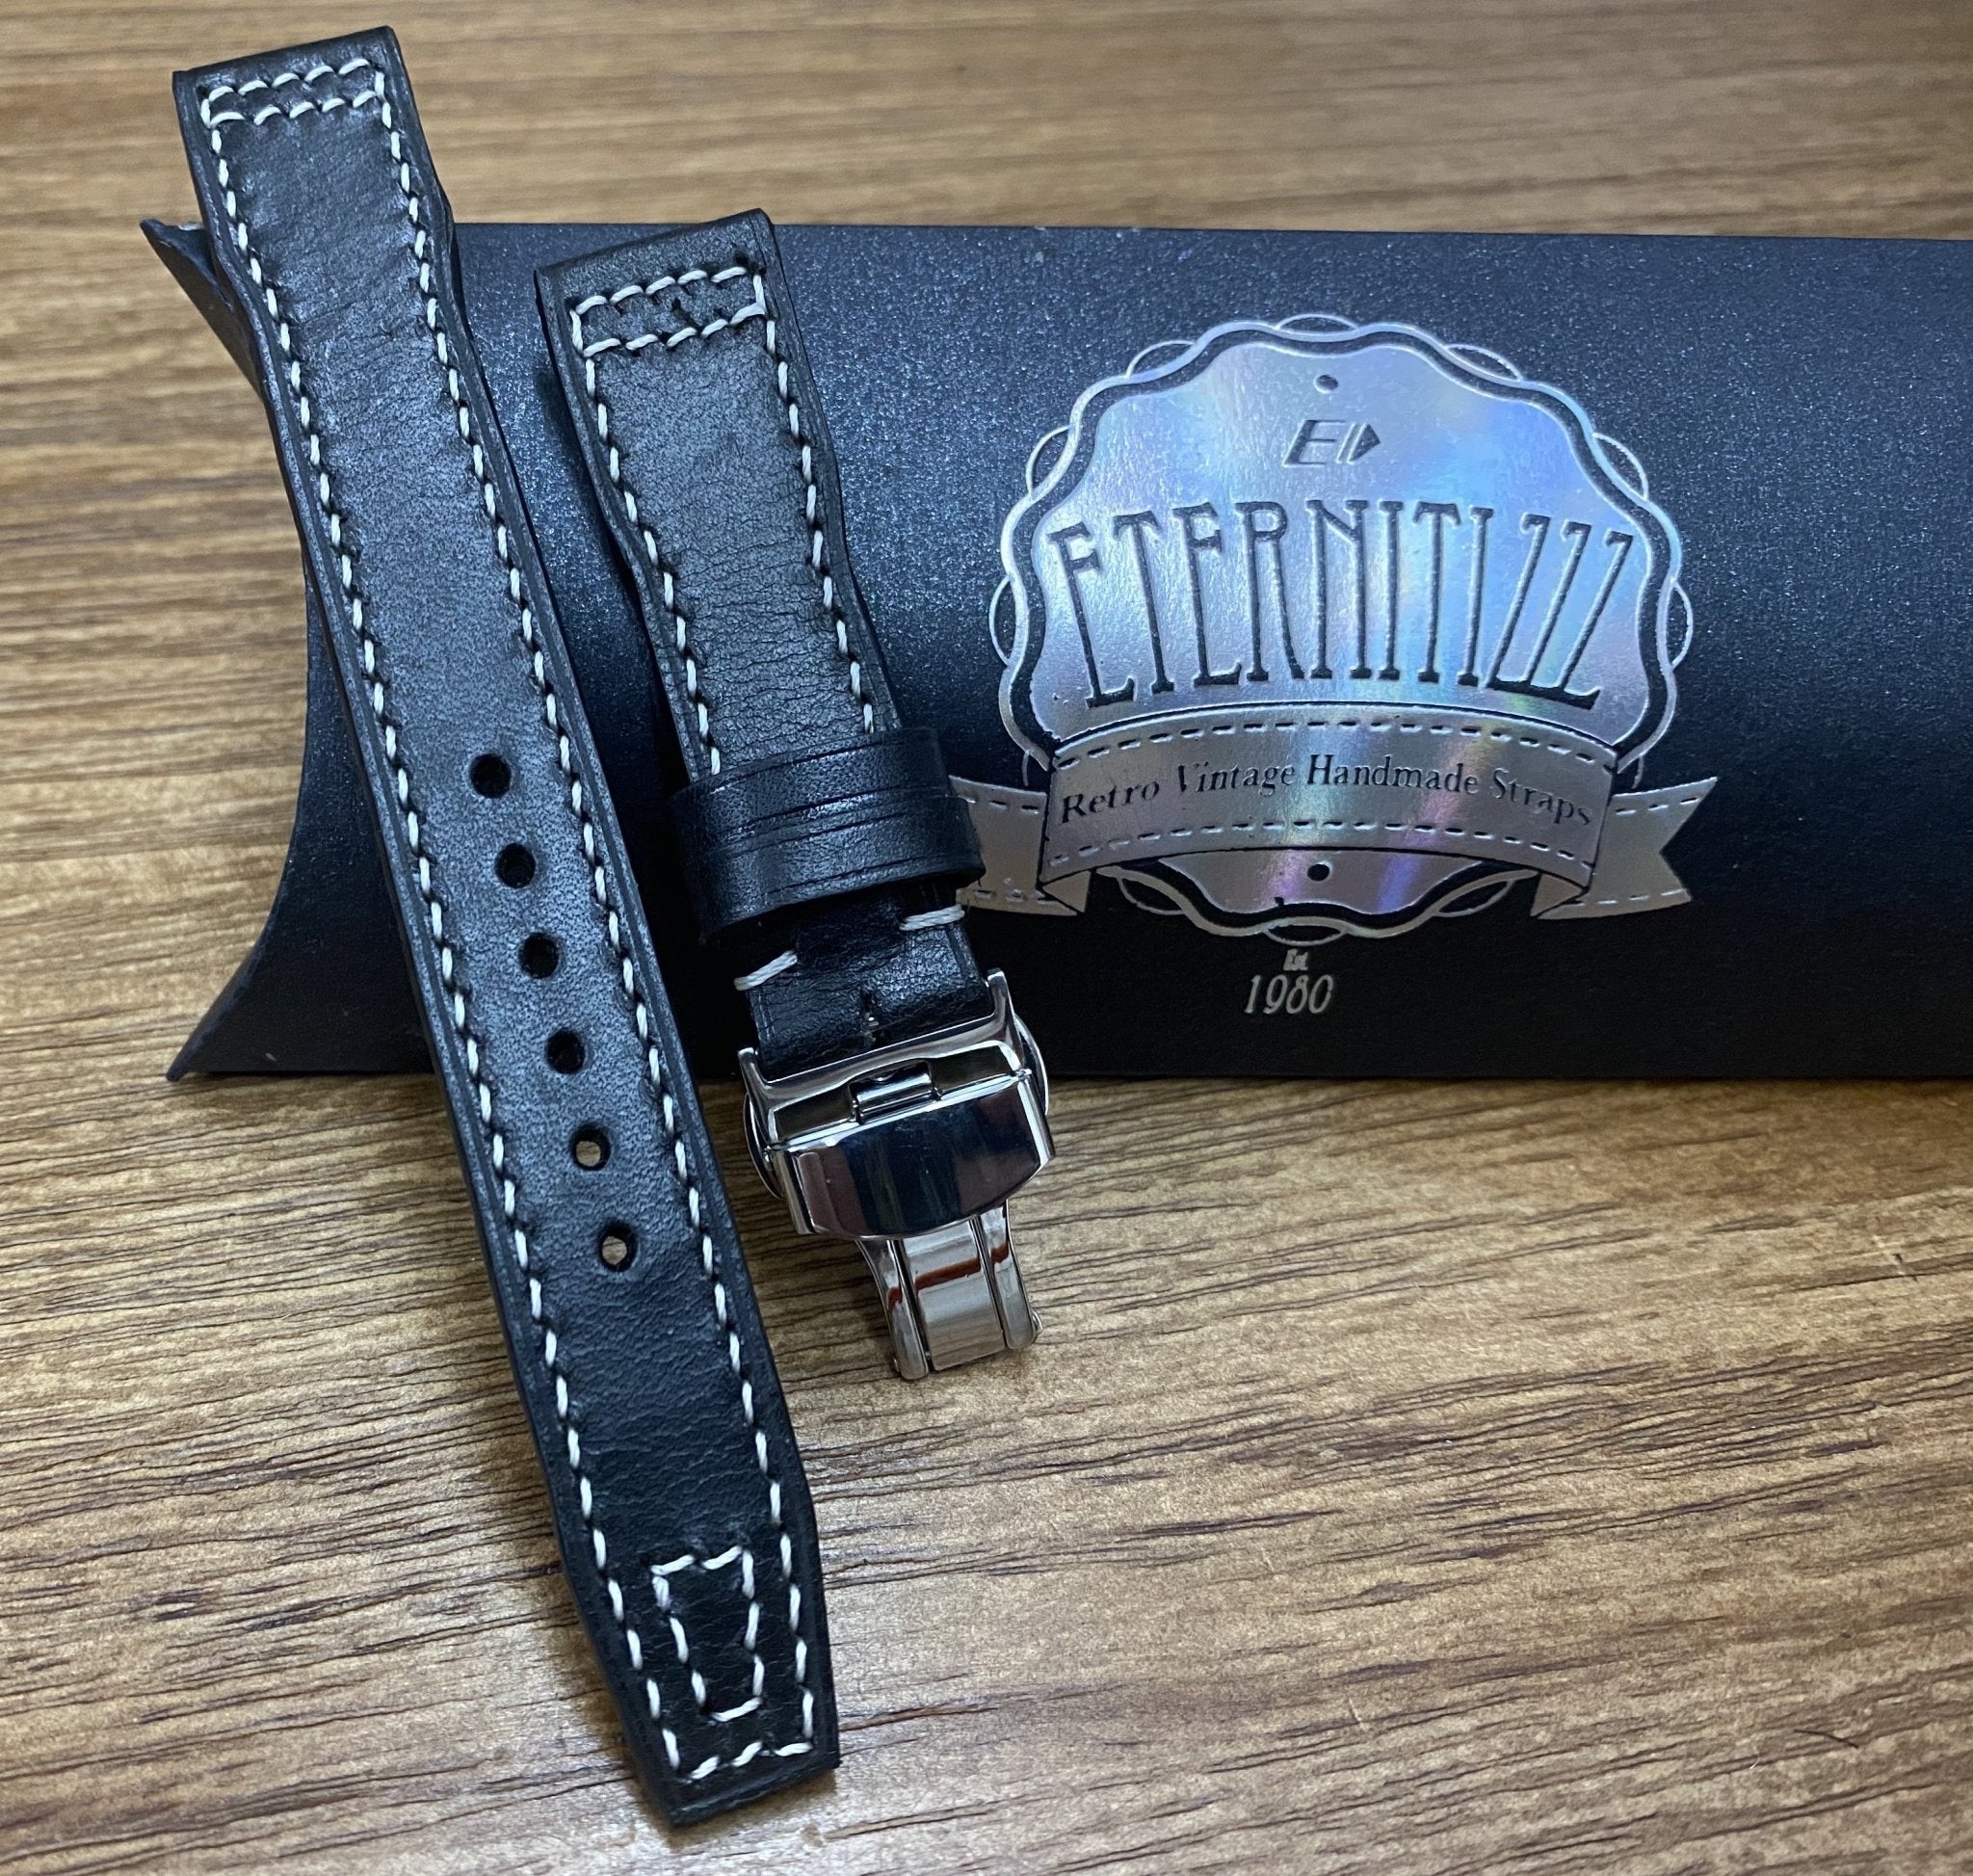 Watch Straps Black leather strap with pin buckle